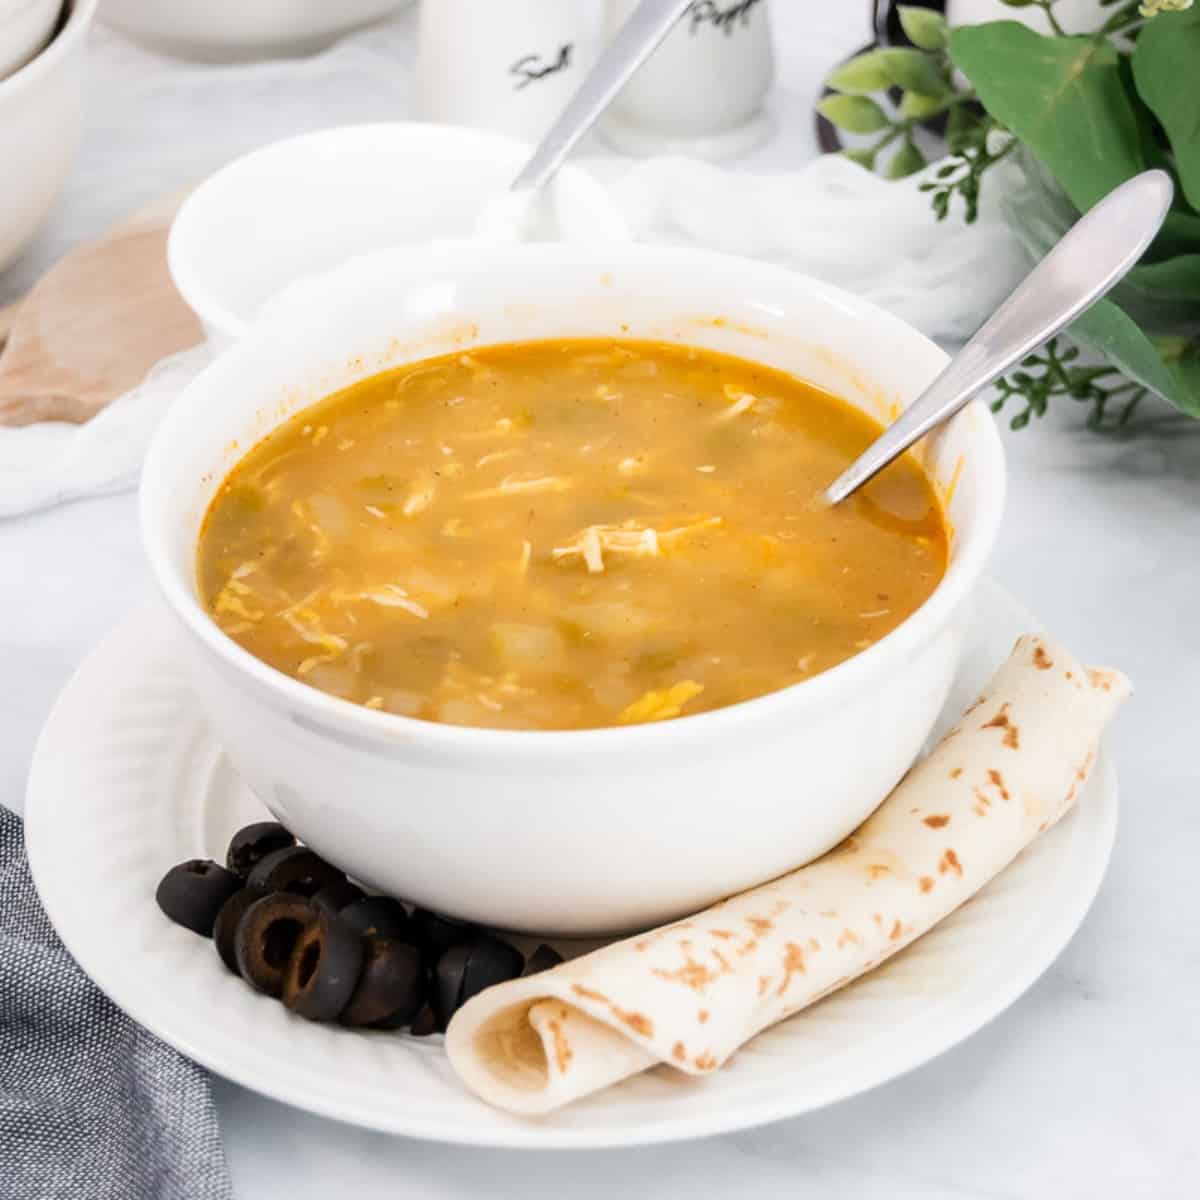 Green chicken chili verde soup in a white bowl with a spoon featured image.